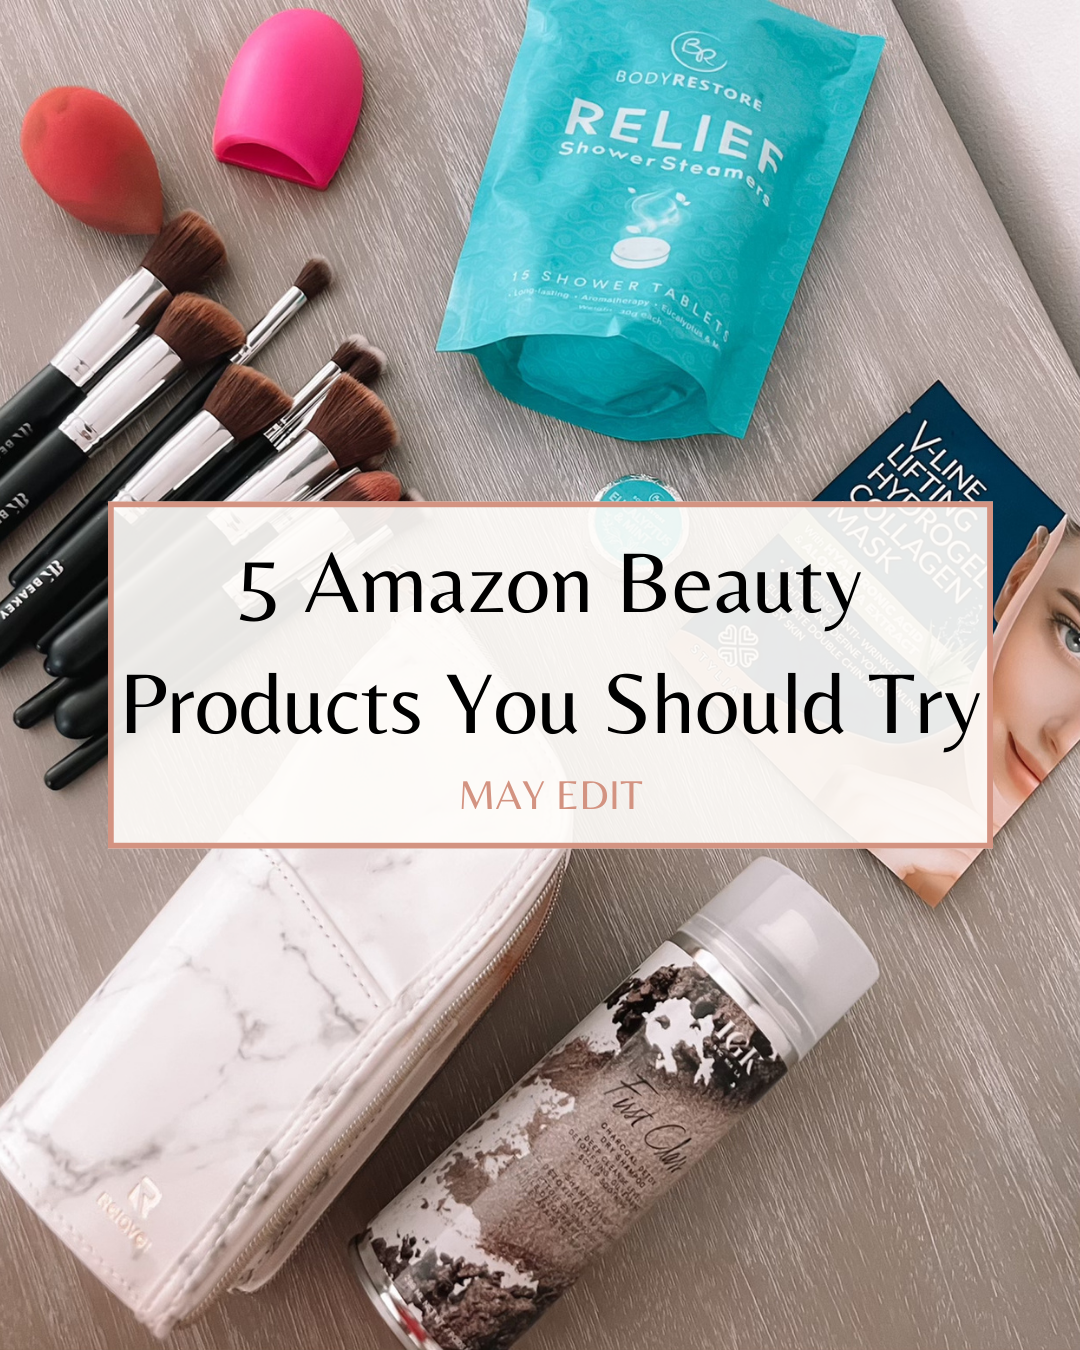 5 Amazon Beauty Products You Should Try – May Edit